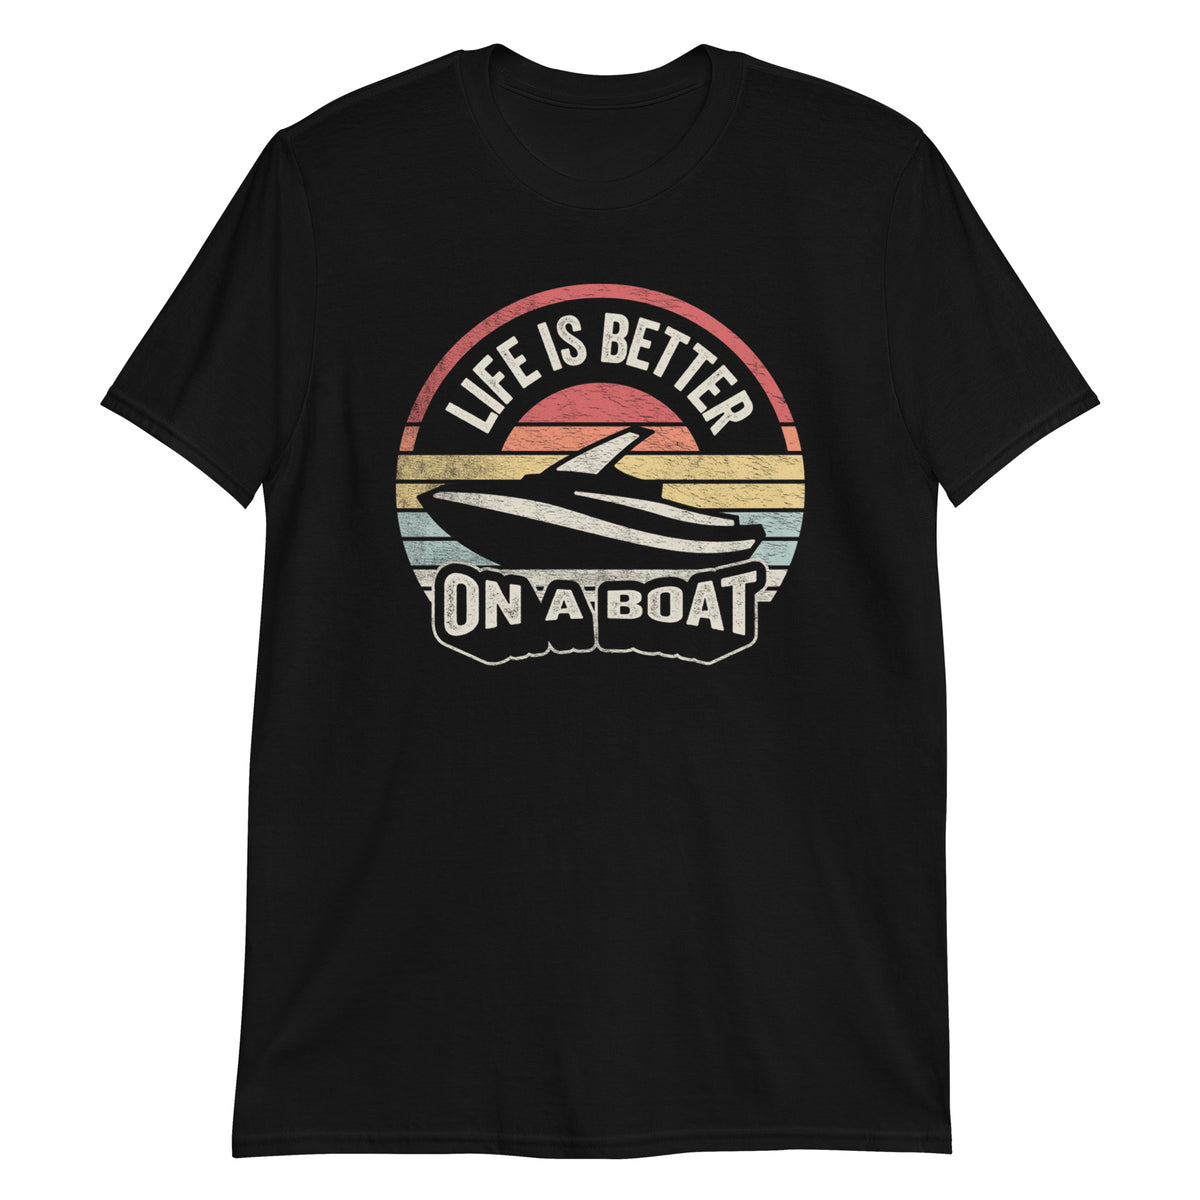 Life is Better on a Boat T-Shirt